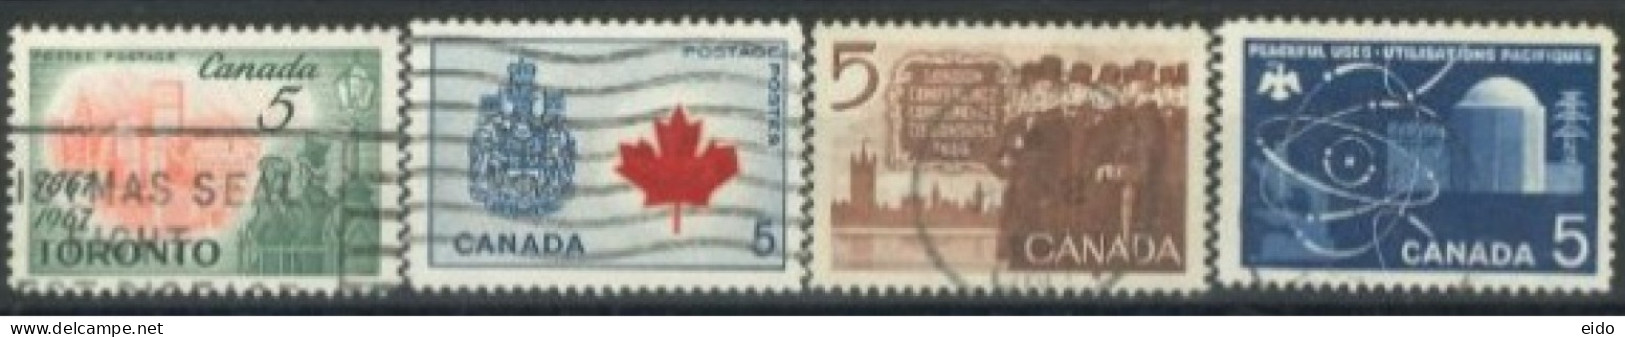 CANADA - 1964/67, STAMPS SET OF 4, USED. - Oblitérés